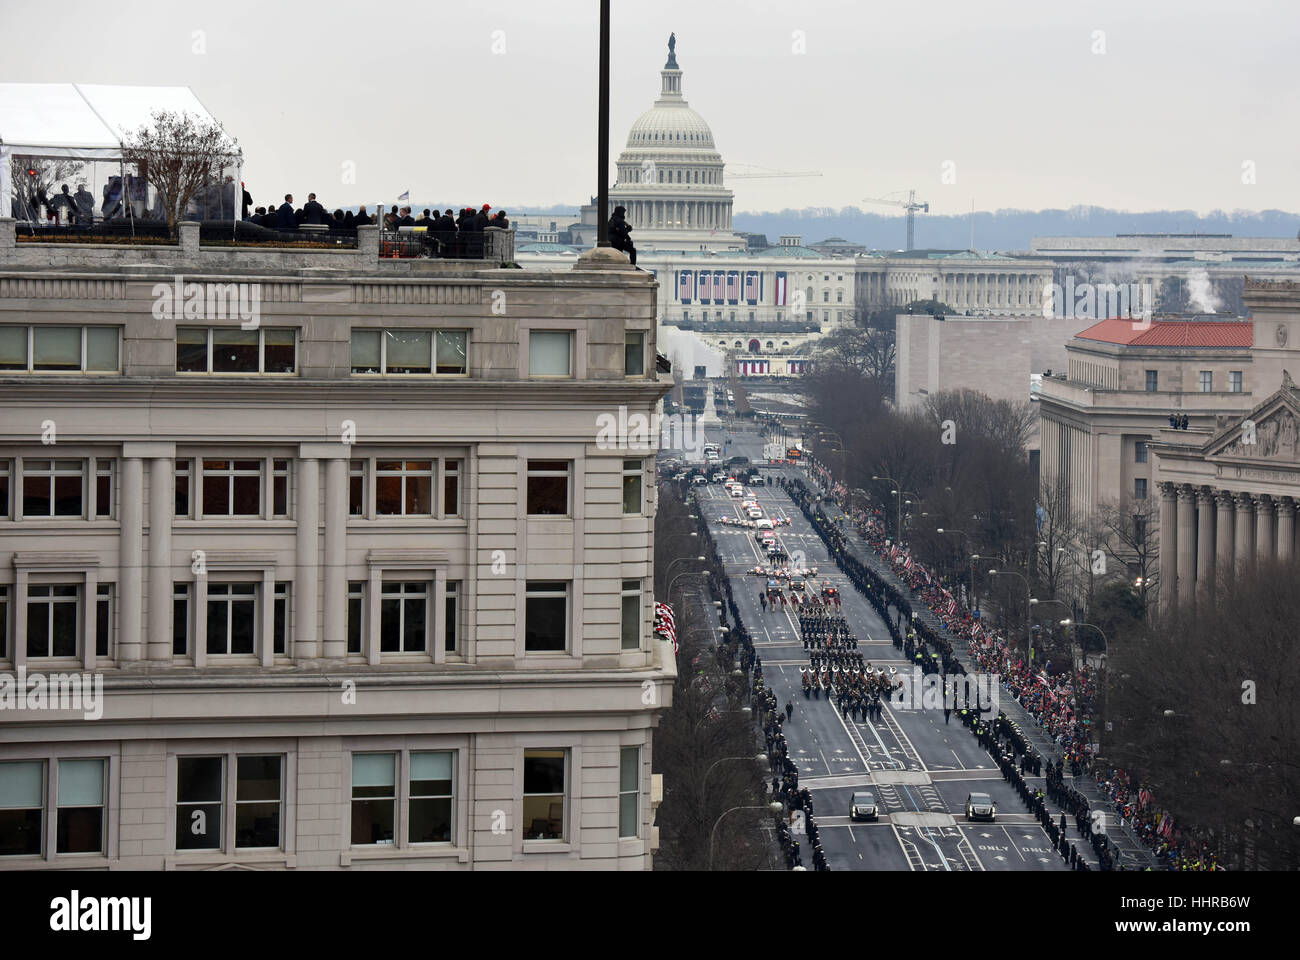 Washington, USA. 20th Jan, 2017. People watch the Inaugural Parade following U.S. President Donald Trump's inauguration in Washington, D.C. Donald Trump was sworn in on Friday as the 45th president of the United States. Credit: Yin Bogu/Xinhua/Alamy Live News Stock Photo